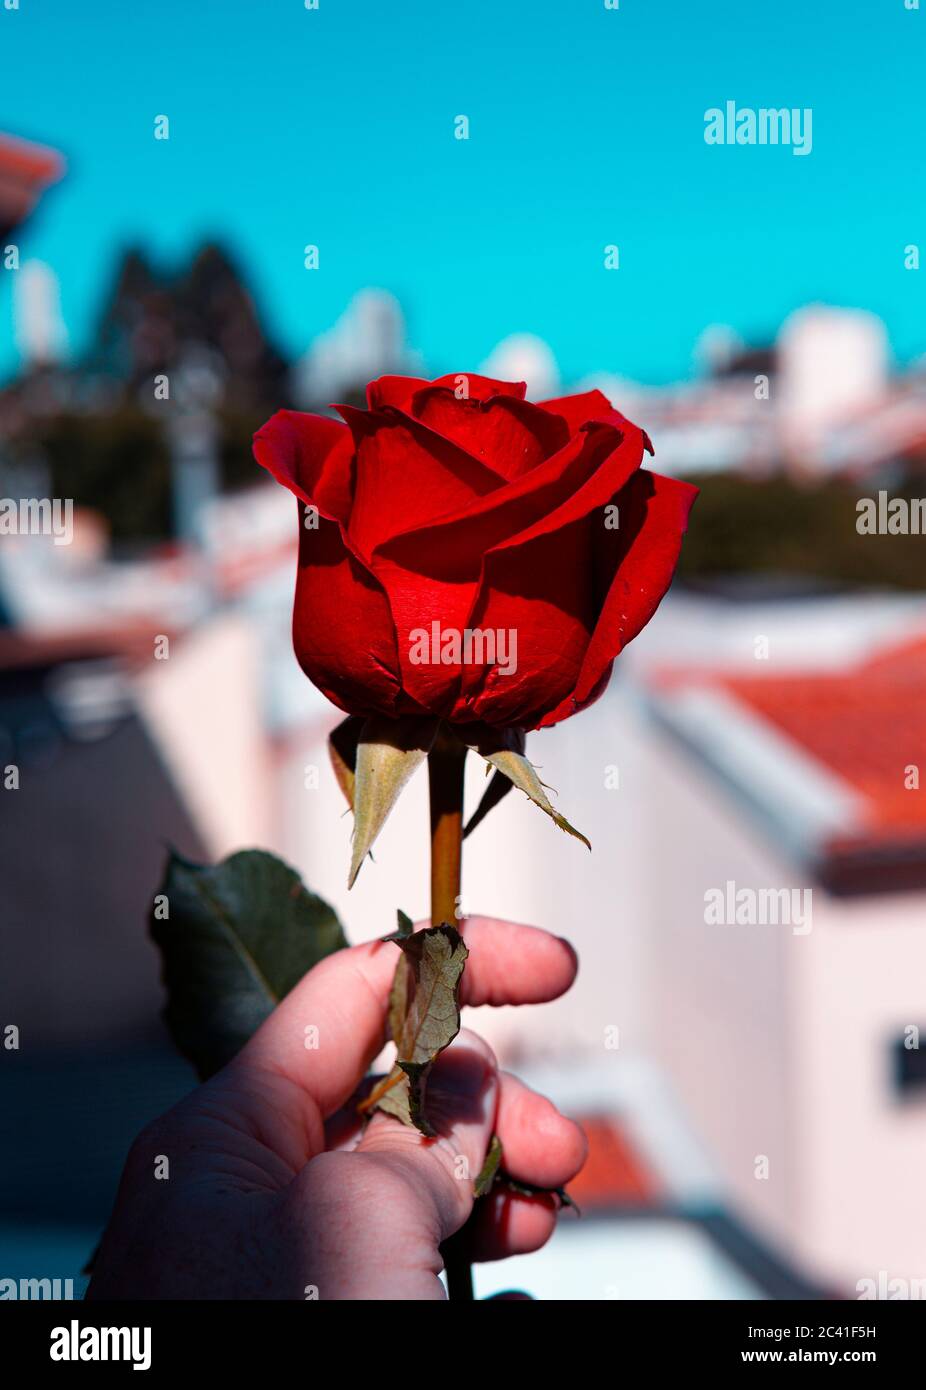 Hand Holding Beautiful Red Rose In City Setting Stock Photo - Alamy